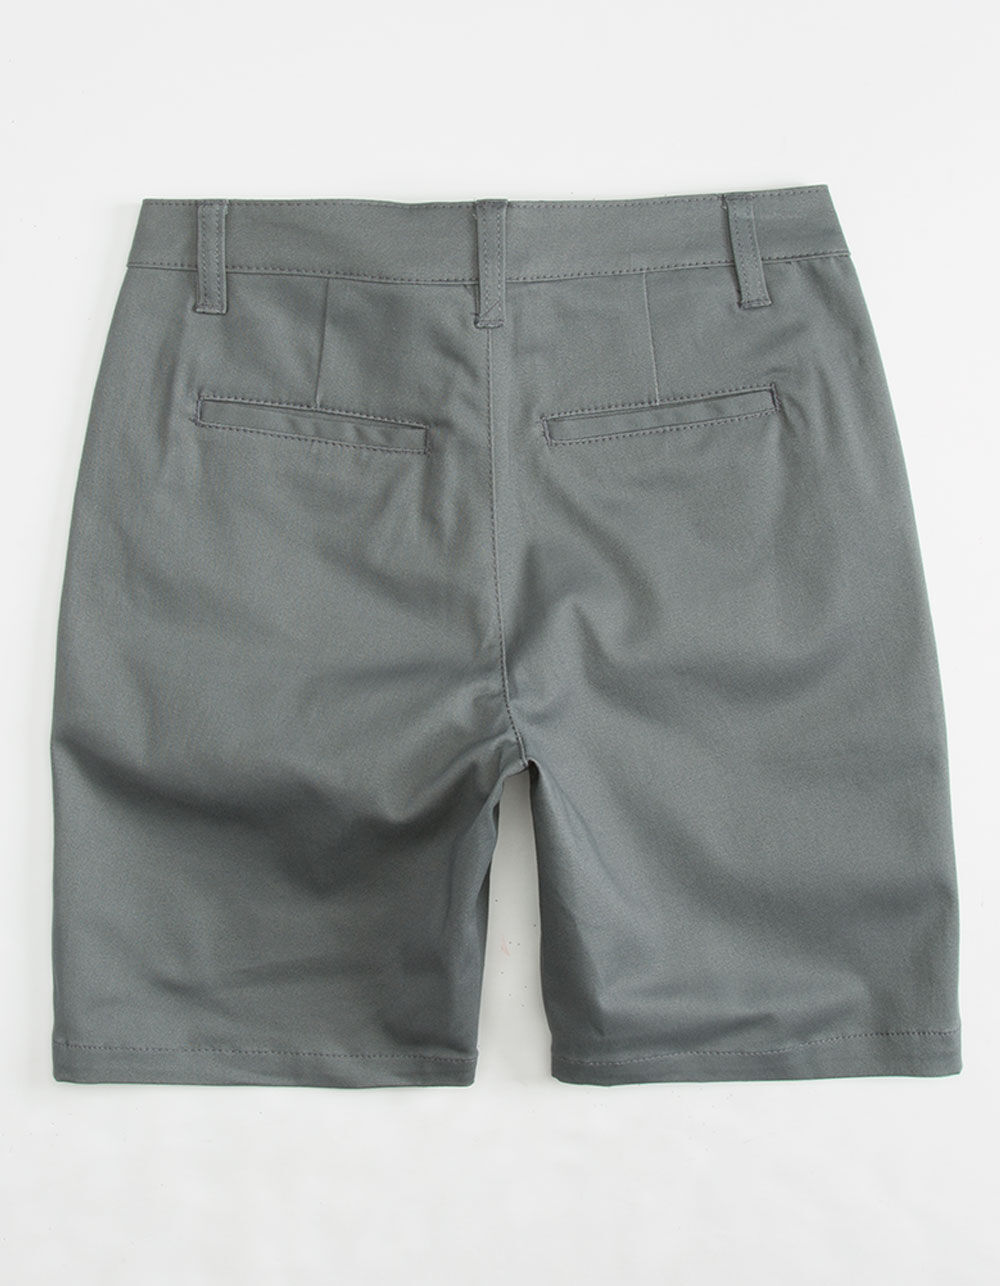 BLUE CROWN Stretch Classic Chino Boys Shorts image number 1